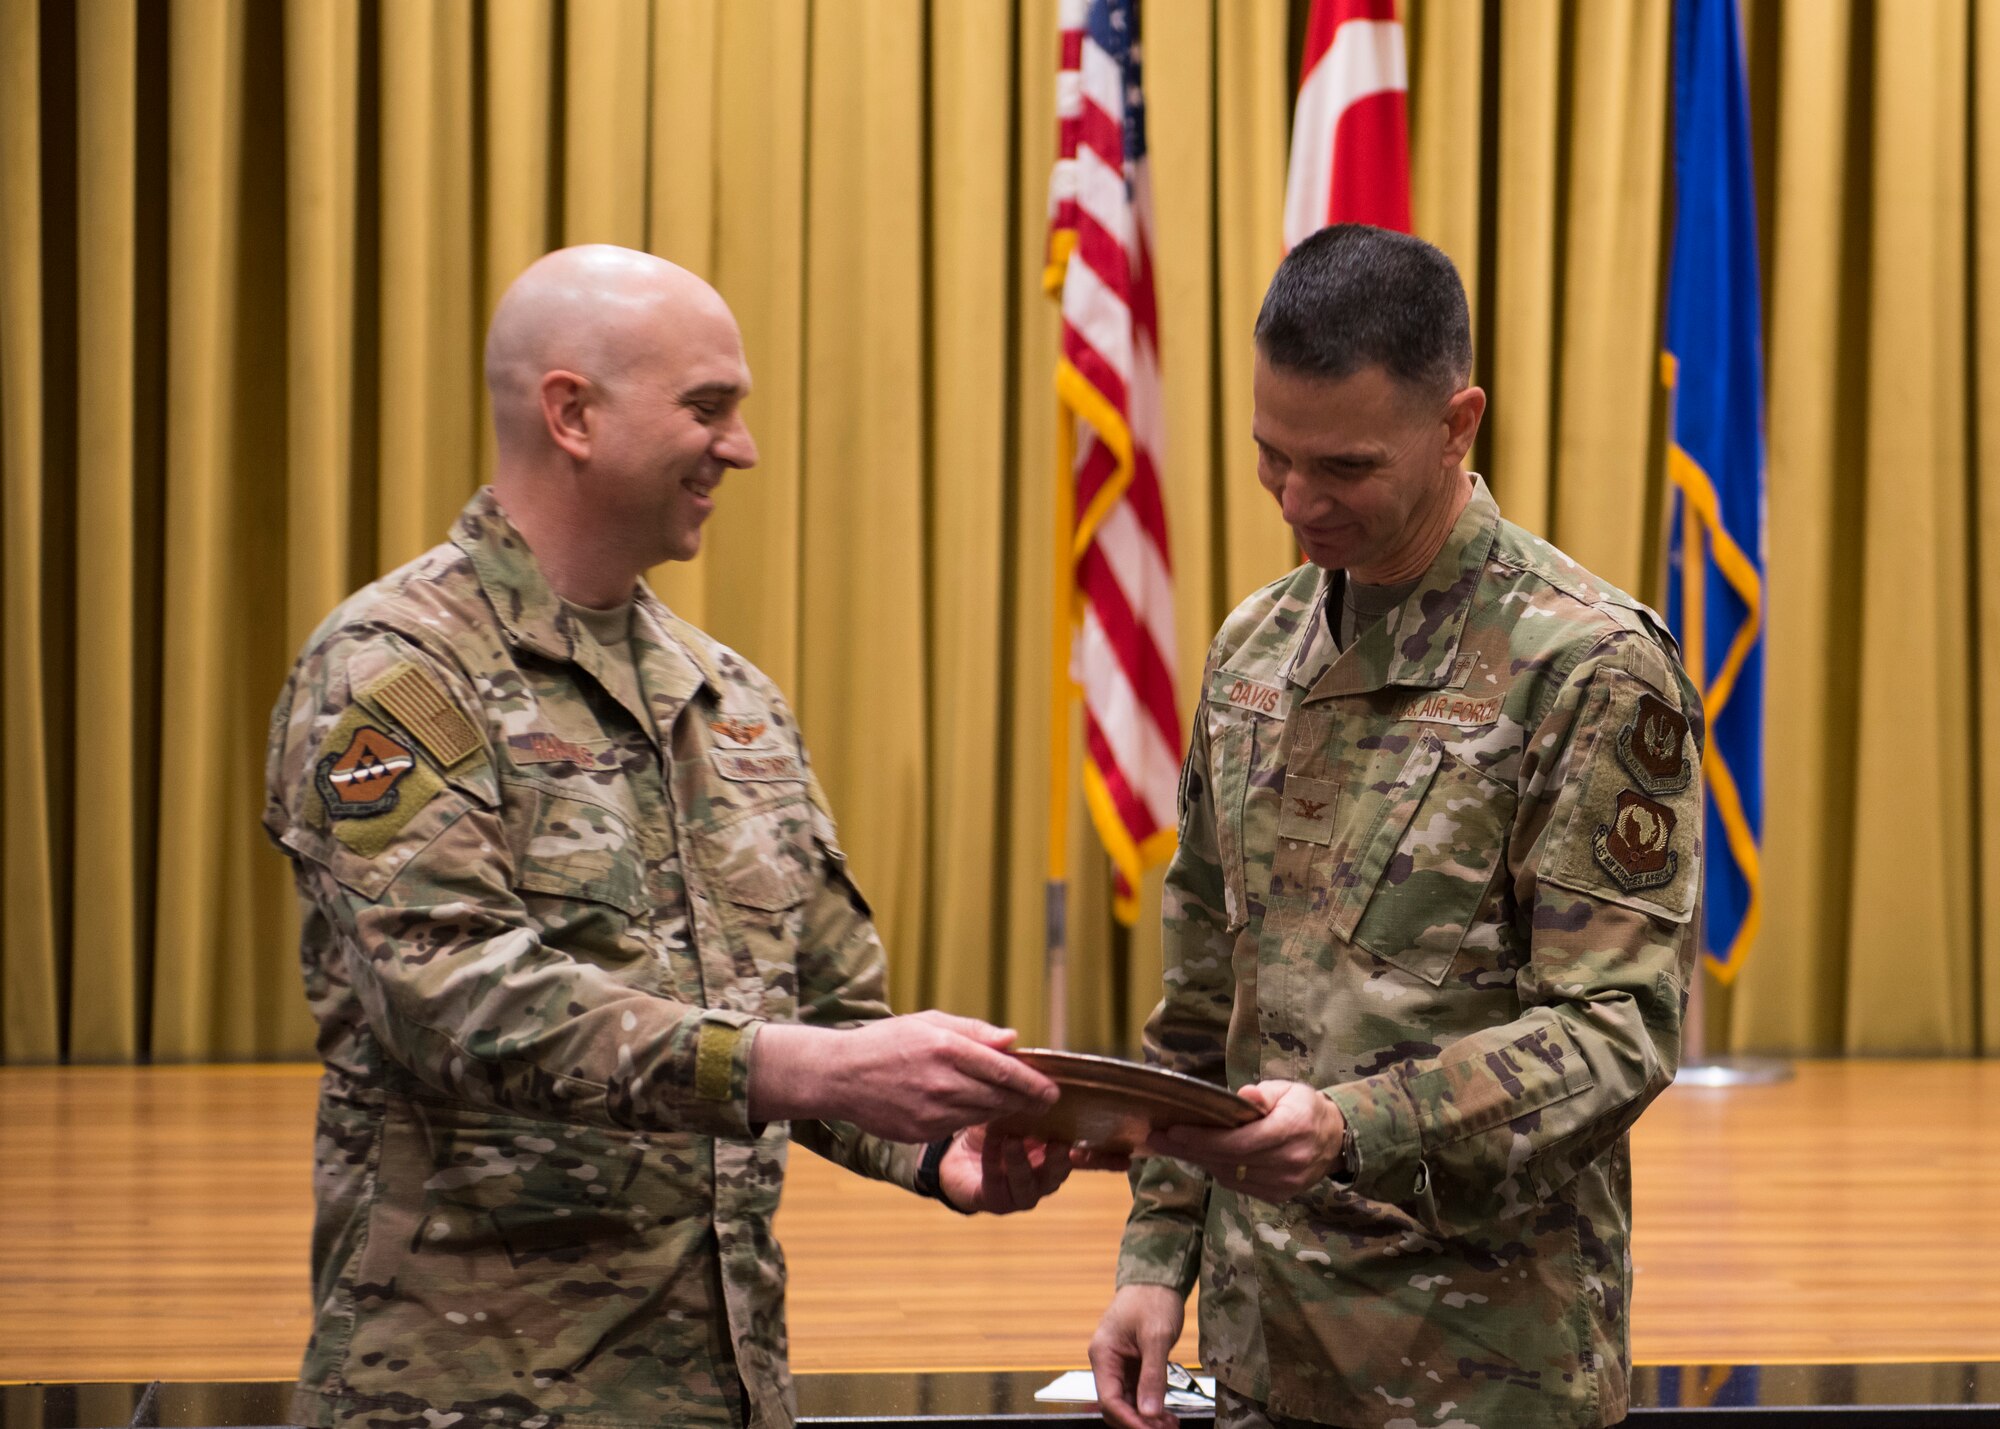 U.S. Air Force Col. John W. Hawkins, 39th Air Base Wing vice commander (left) presents U.S. Air Forces in Europe and Air Forces Africa Command Chaplain Col. Trent Davis (right) with a gift, Feb. 20, 2020, at Incirlik Air Base, Turkey. Both English and Turkish writing was engraved on the copper-plated memento to express appreciation for his words during the 2020 National Prayer Breakfast. (U.S. Air Force photo by Senior Airman Matthew Angulo)